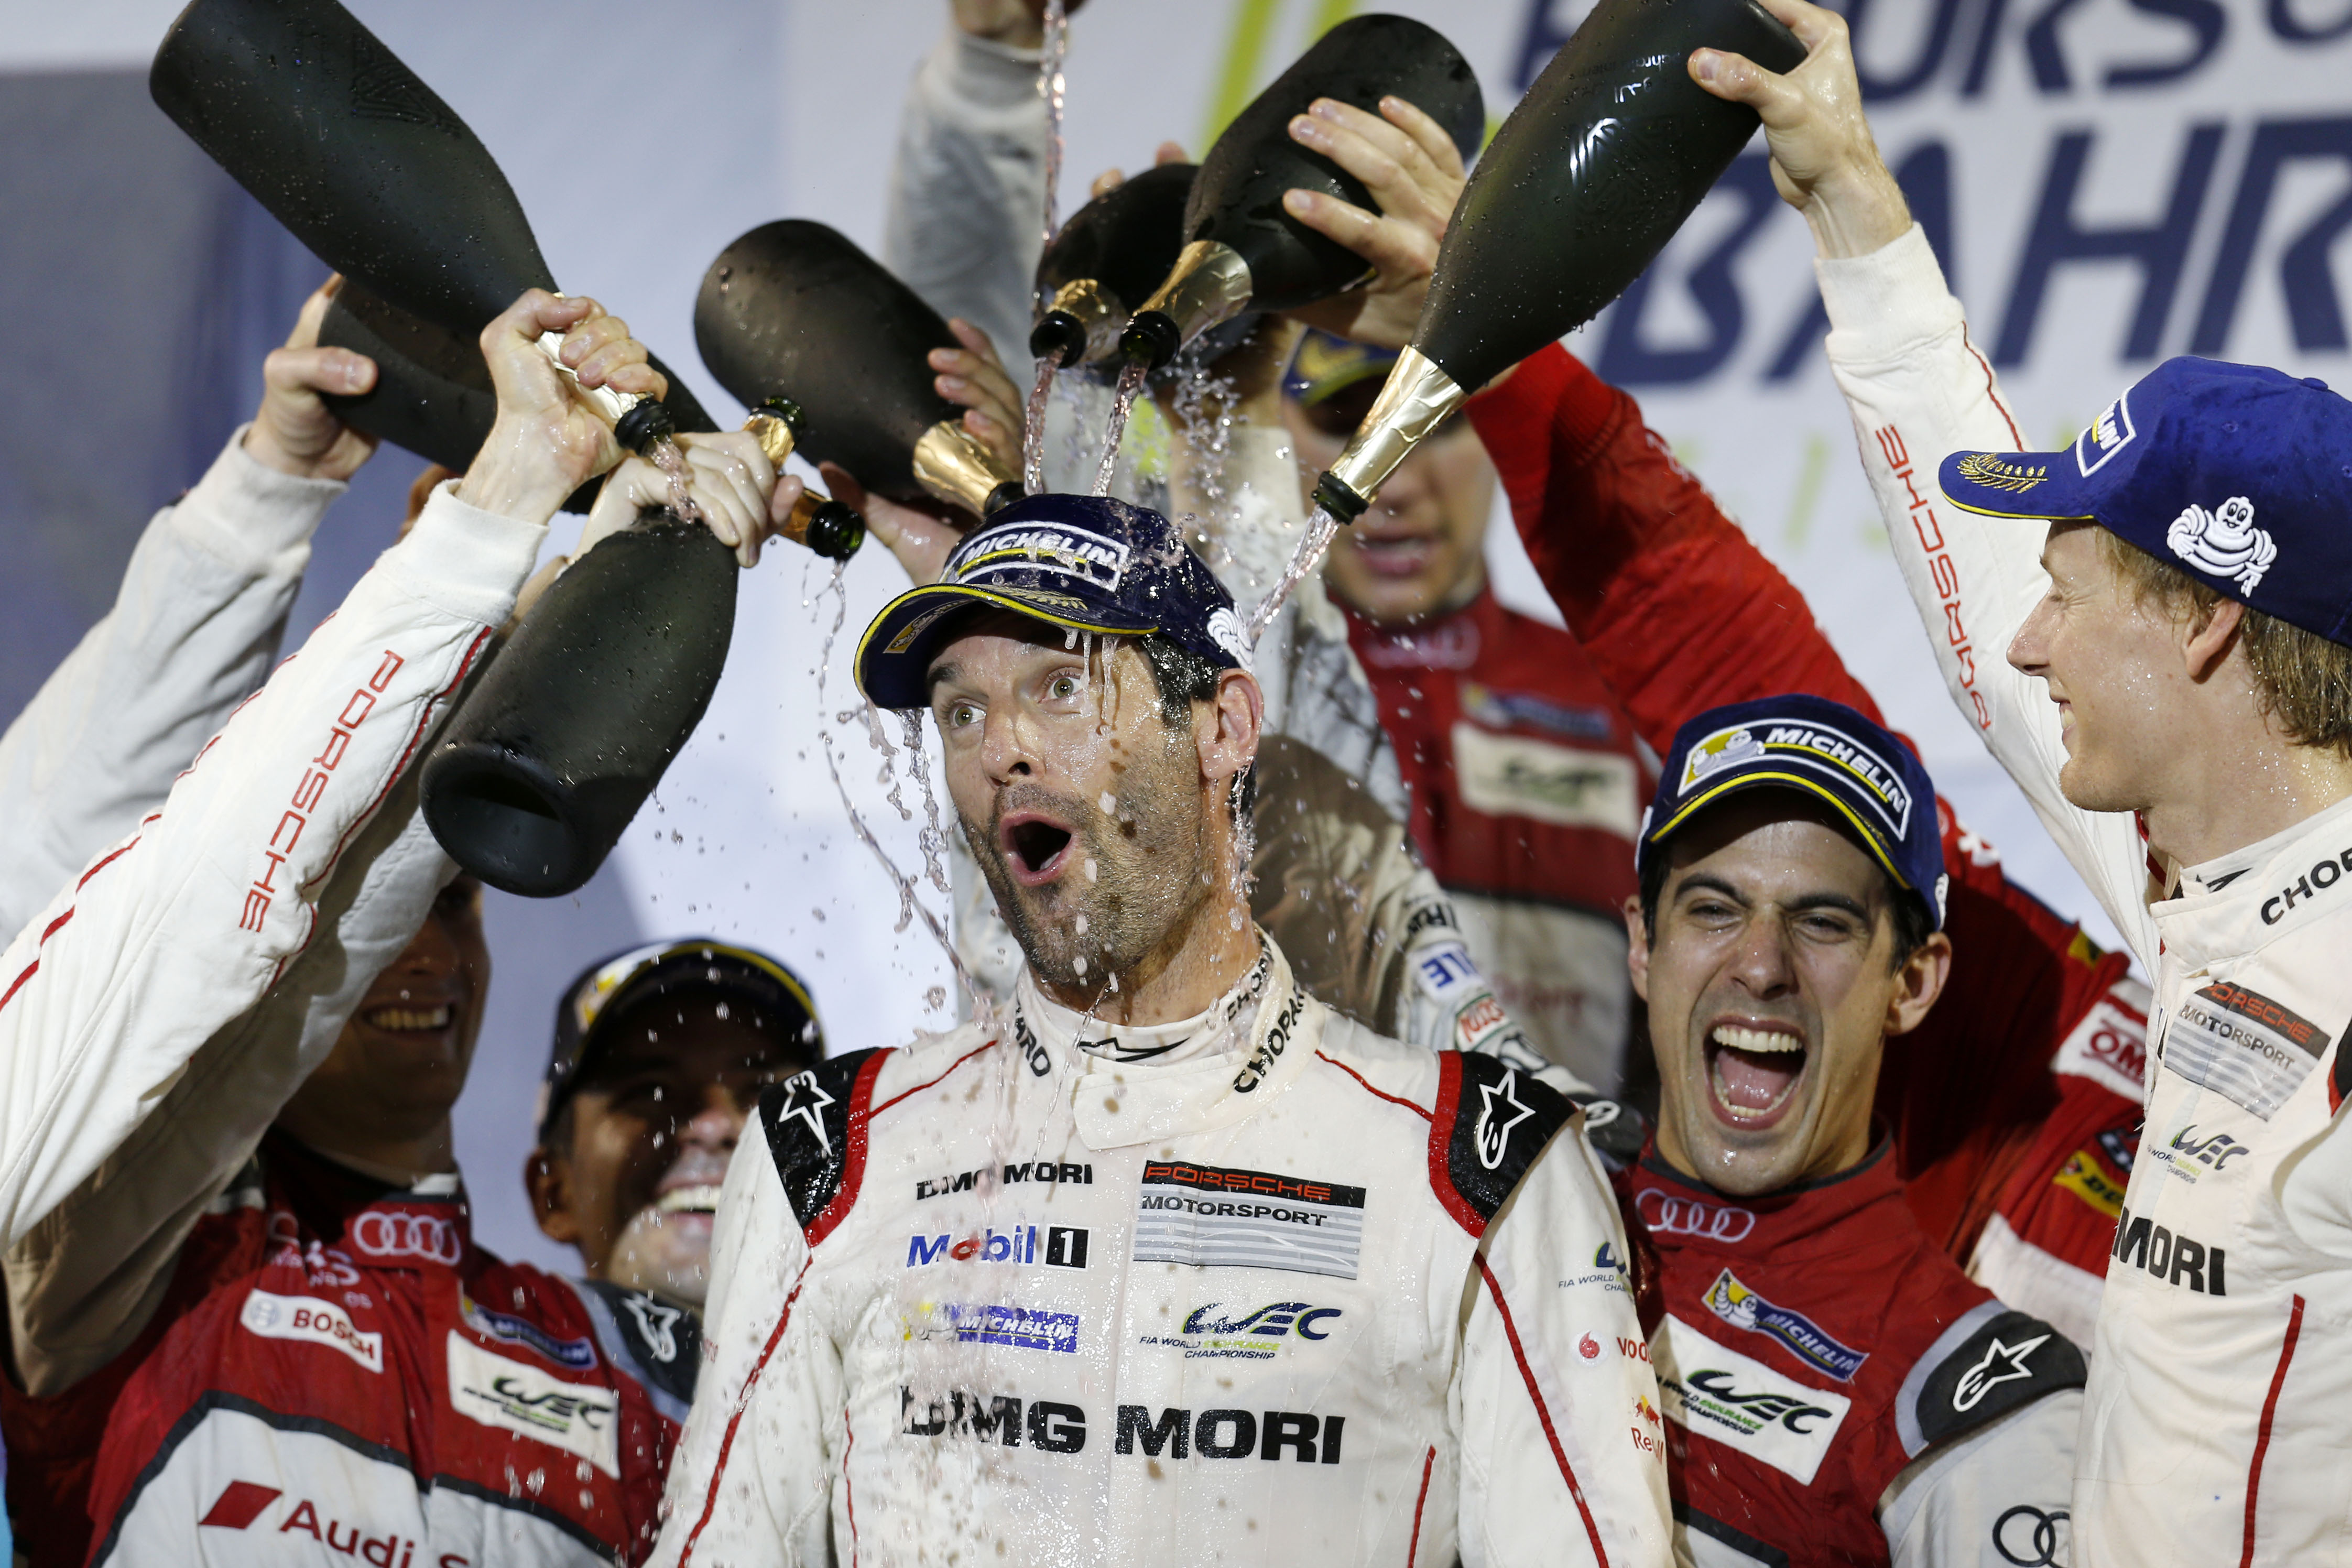 Mark Webber Podium Finish And Title Win For Porsche In A Highly Emotional Finale